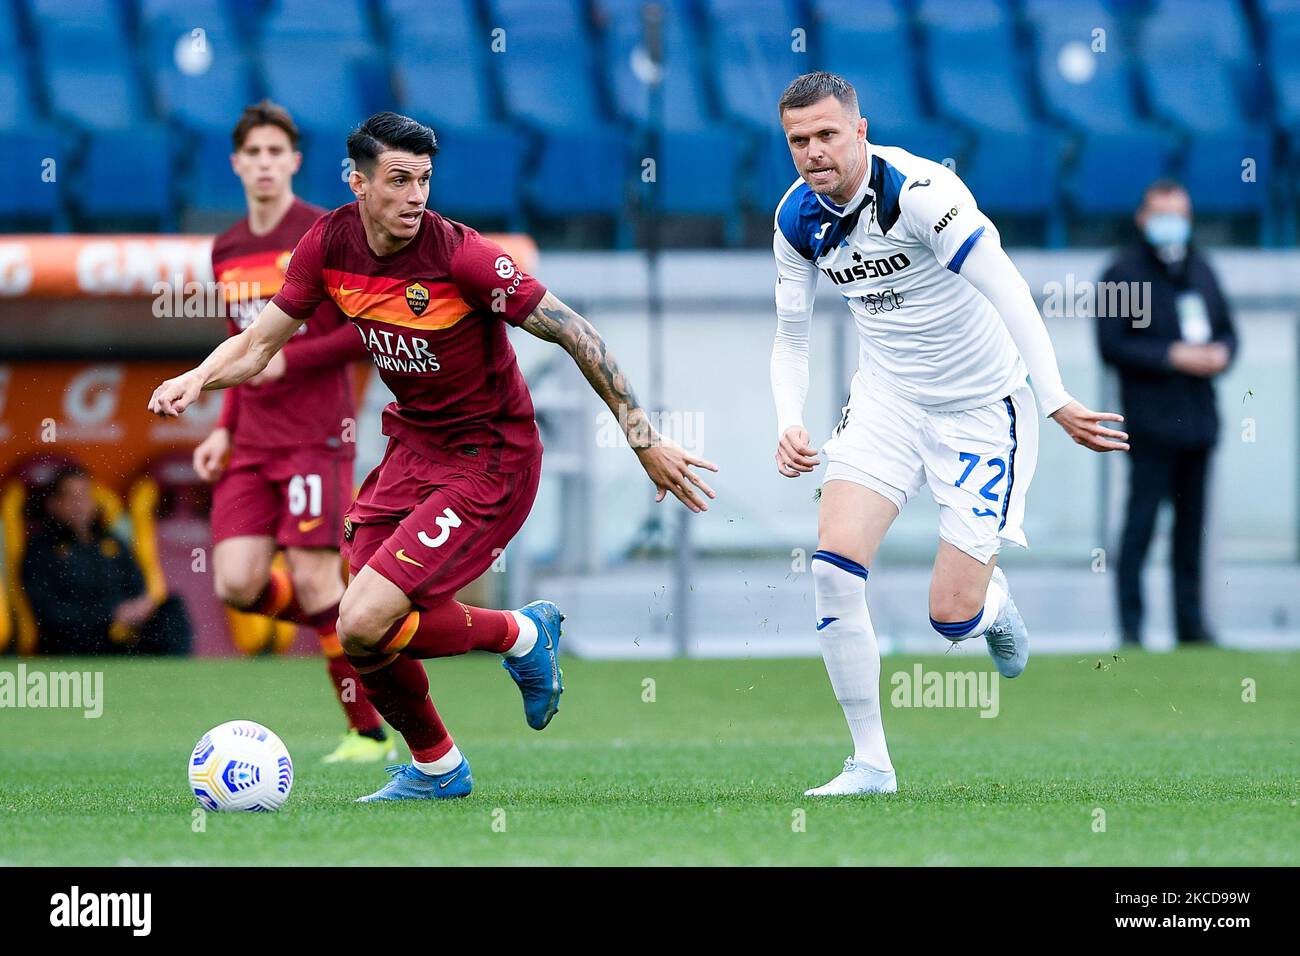 Roger Ibanez of AS Roma and Josip Ilicic of Atalanta BC compete for the ball during the Serie A match between AS Roma and Atalanta BC at Stadio Olimpico, Rome, Italy on 22 April 2021. (Photo by Giuseppe Maffia/NurPhoto) Stock Photo